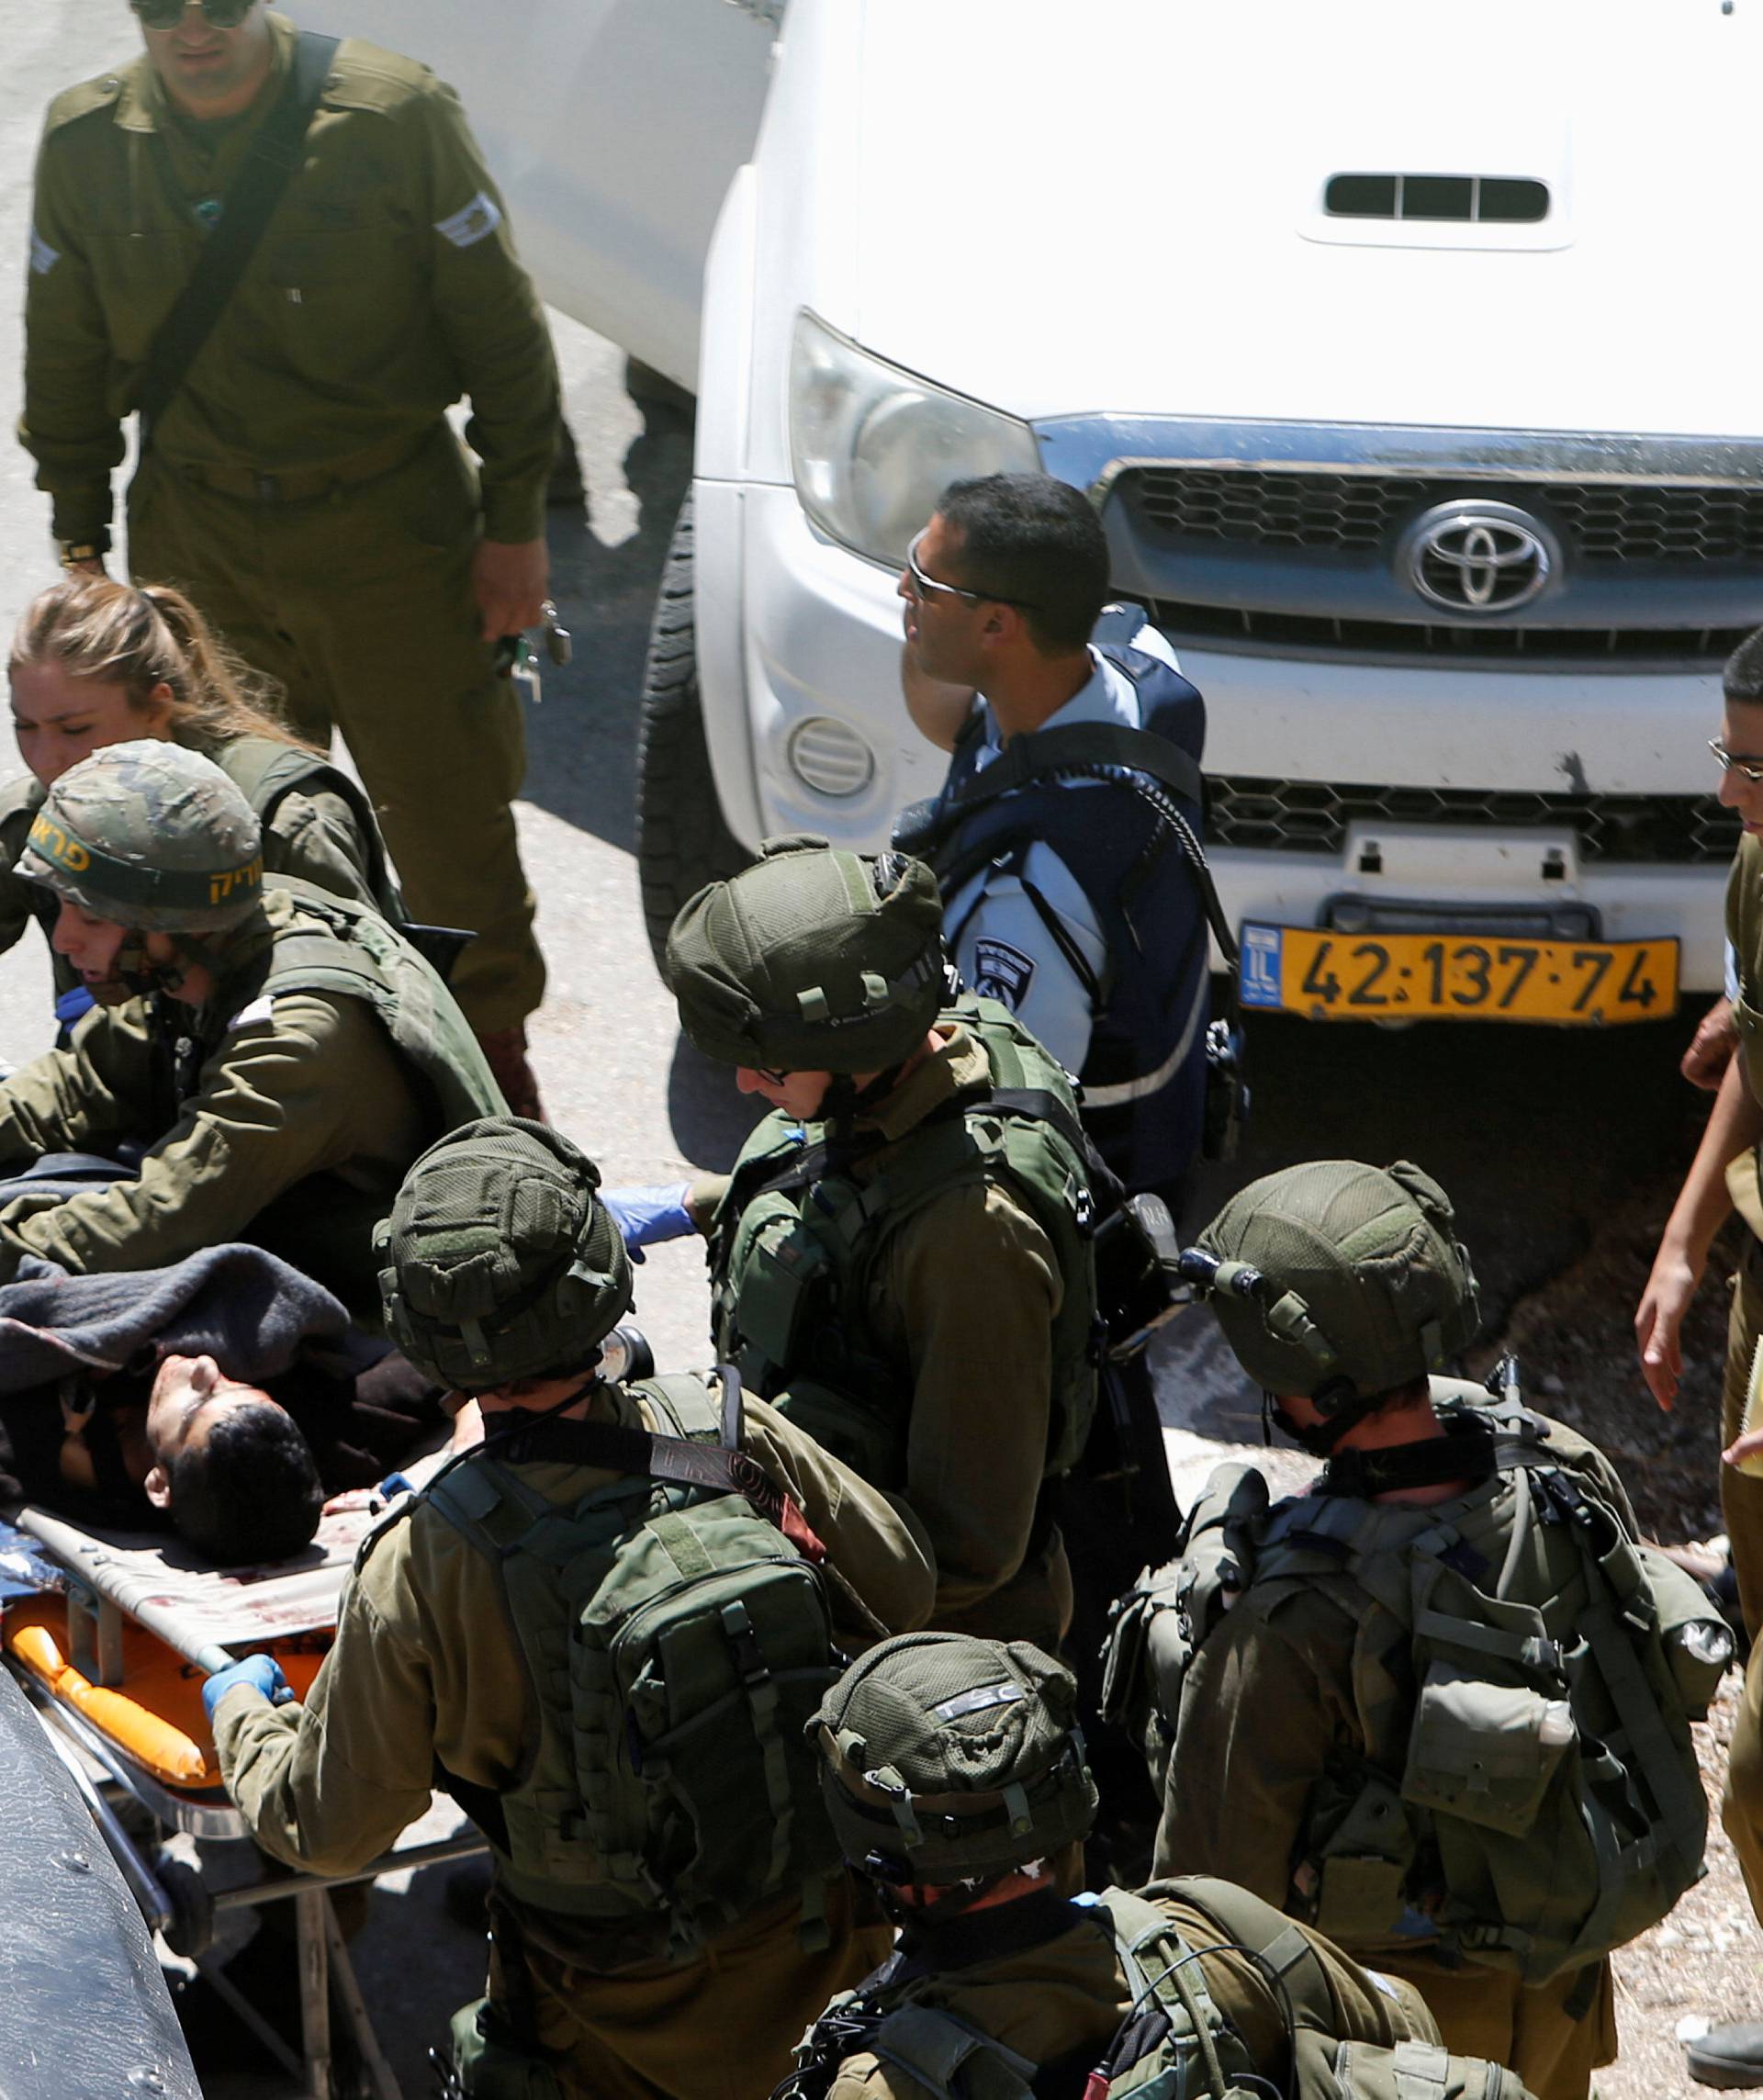 Israeli forces carry on a stretcher a Palestinian assailant after he was shot by Israeli troops at the scene of a stabbing attack in the West Bank city of Hebron